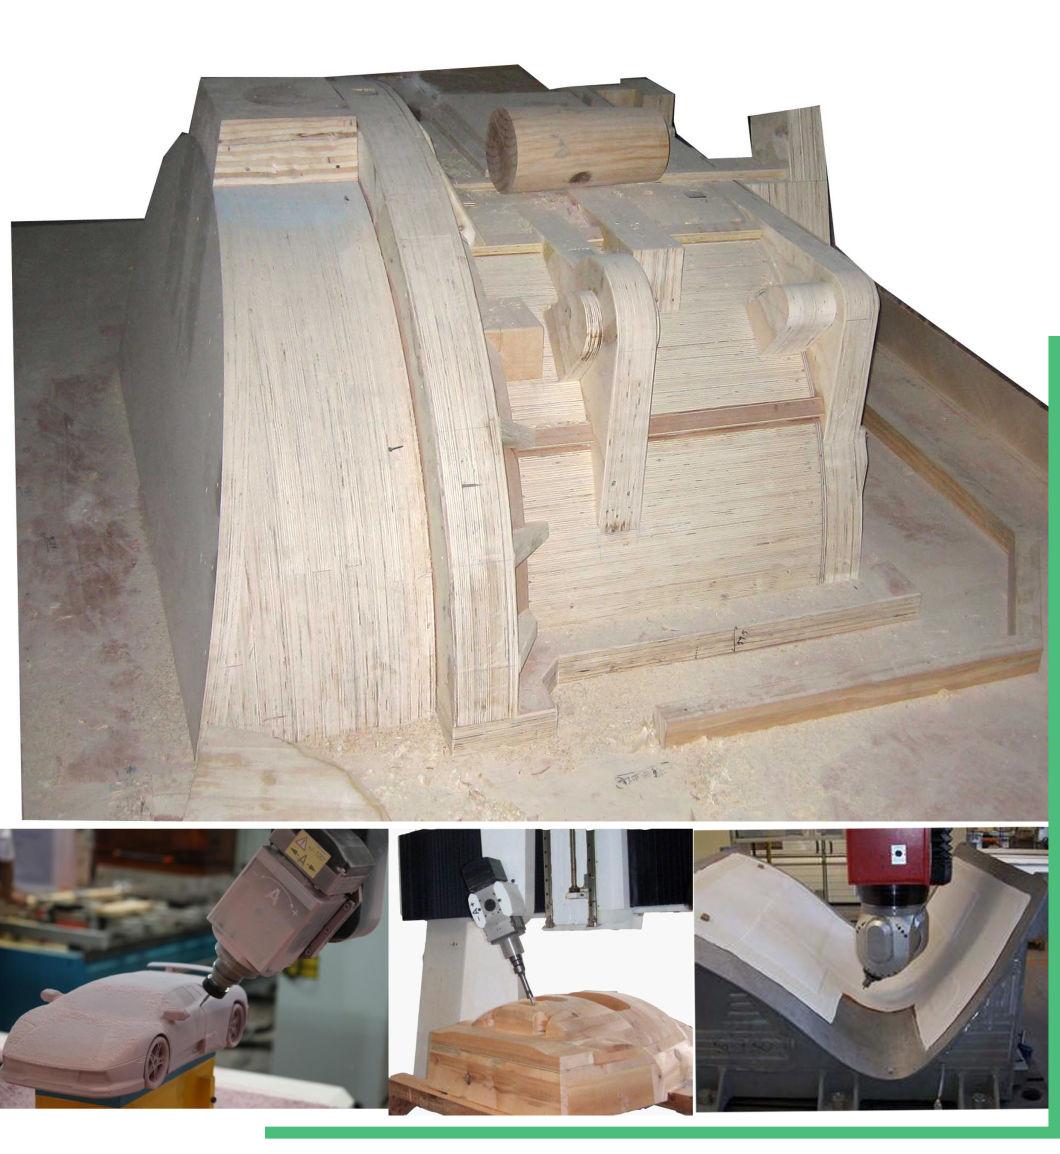 4 Axis Automatic 3D Wood Carving Router CNC Machine